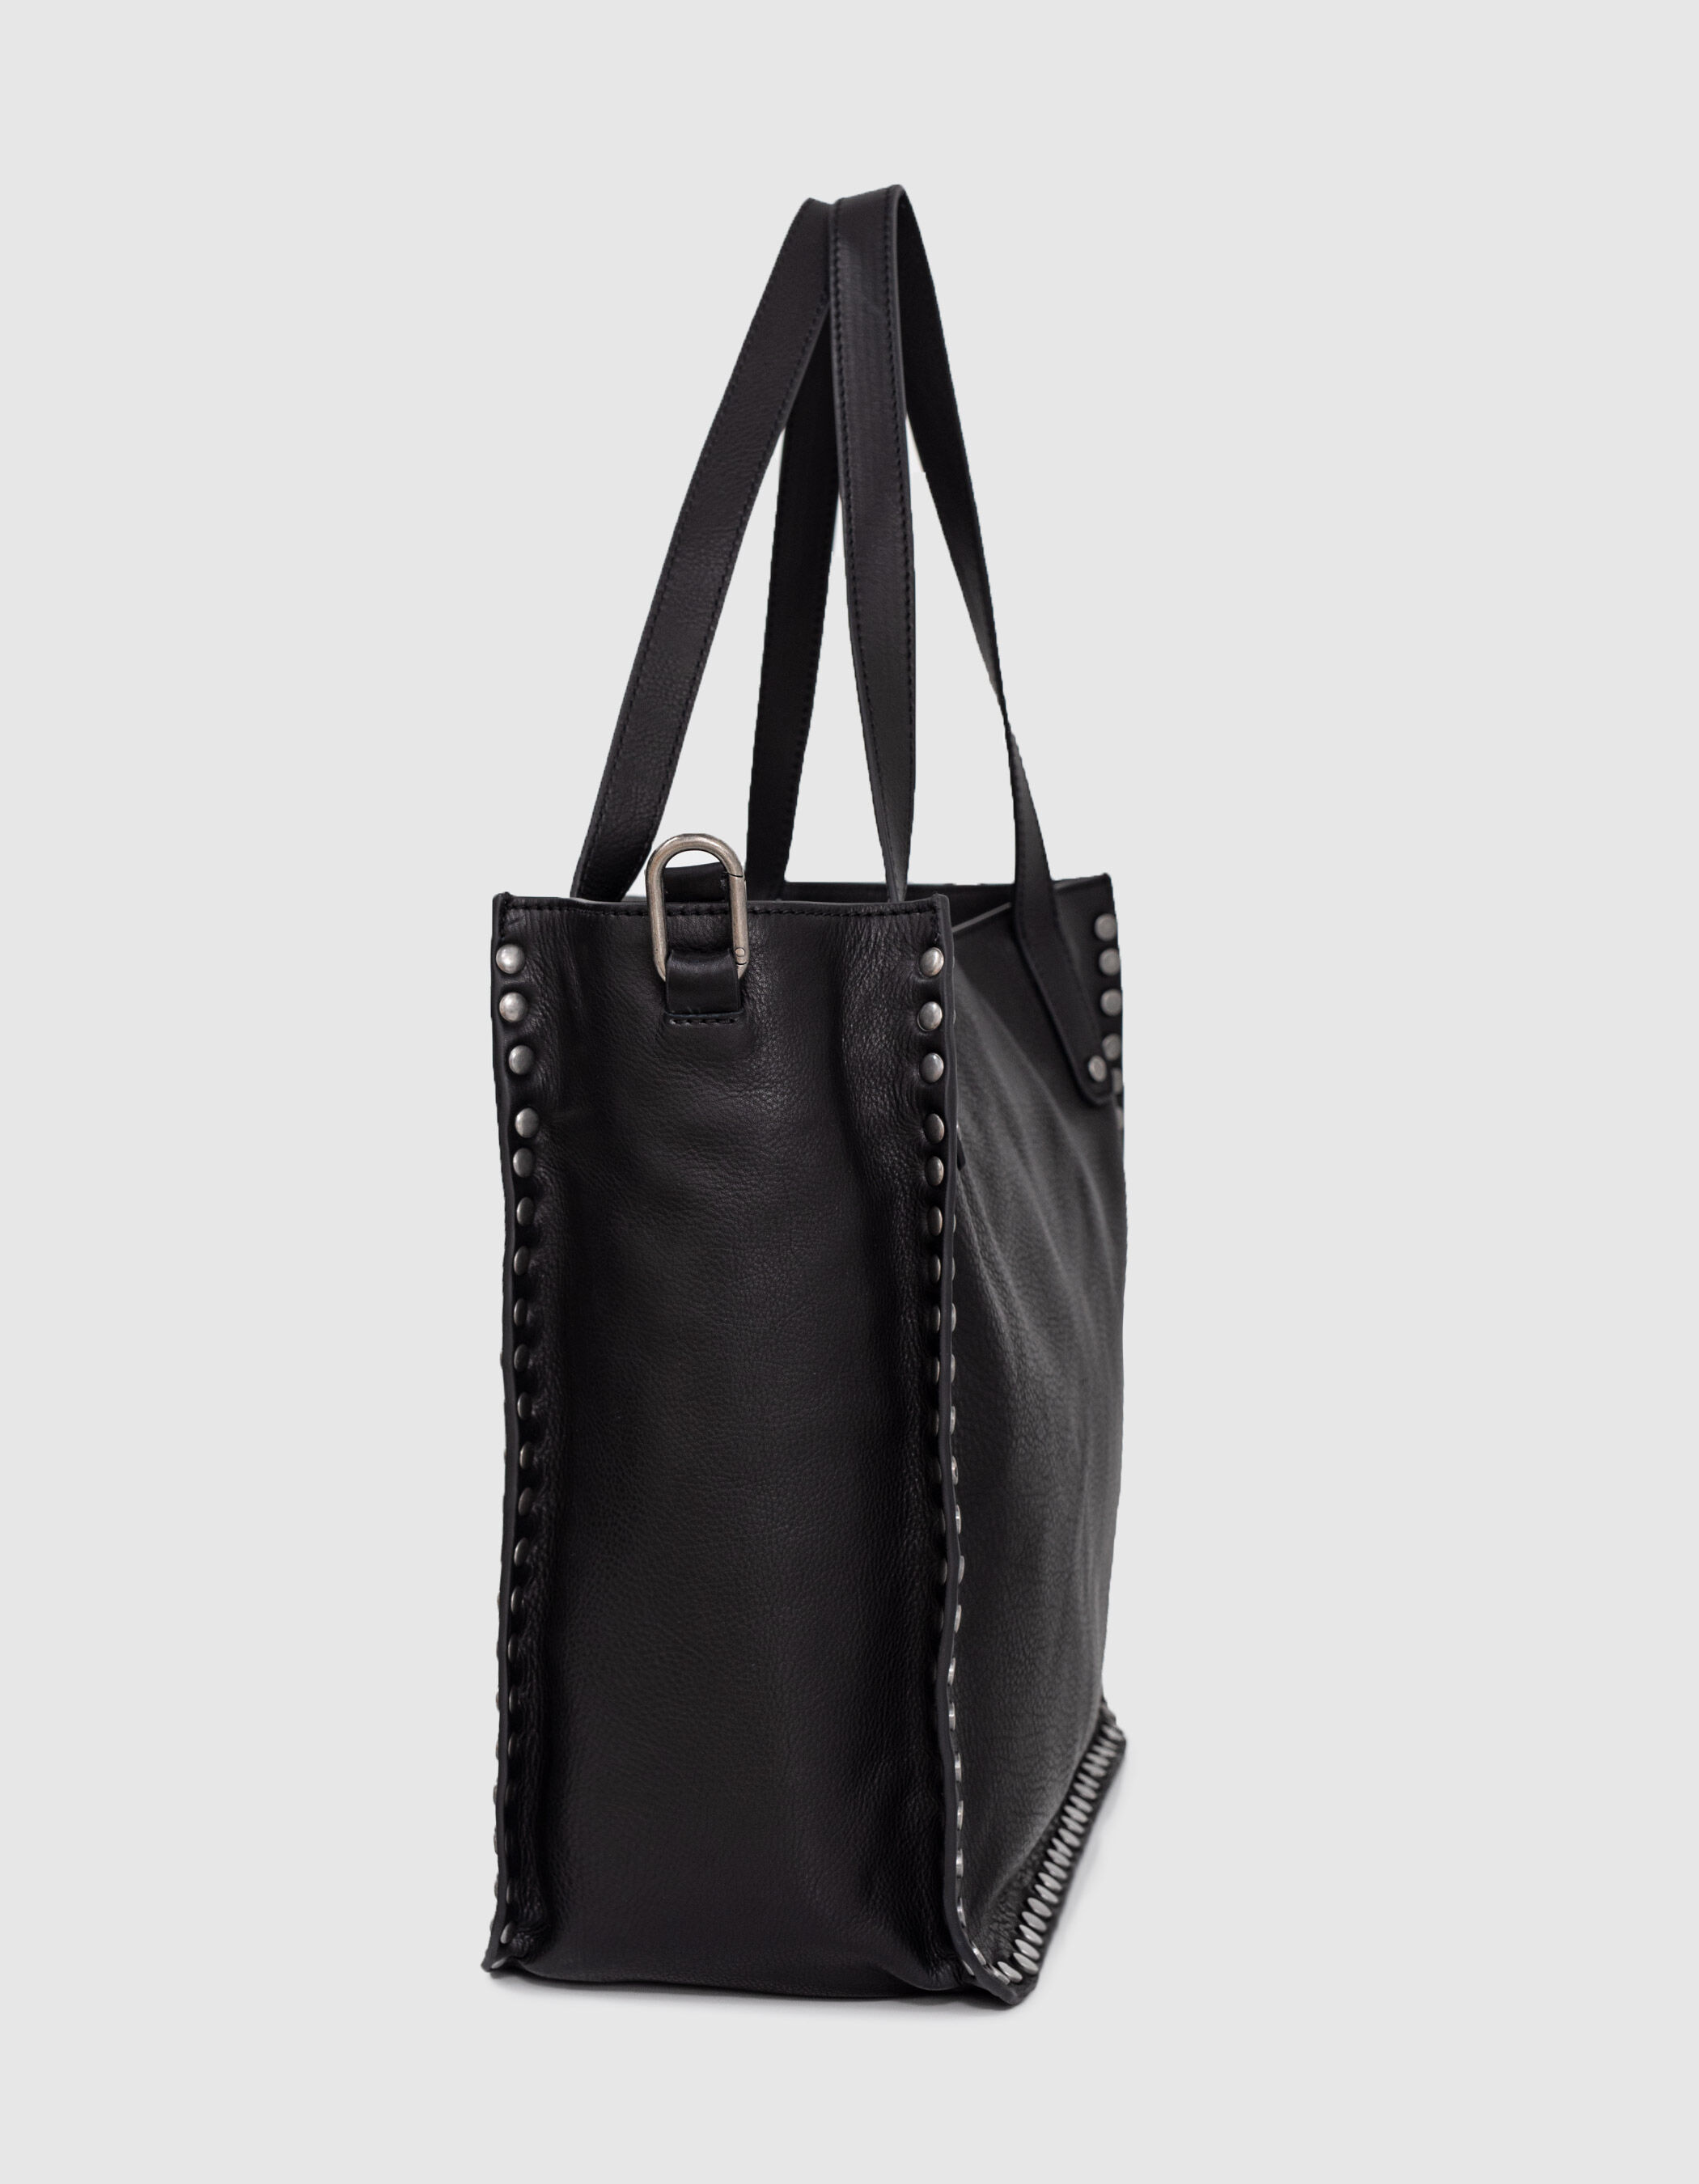 The Working Bag women's black studded leather tote bag